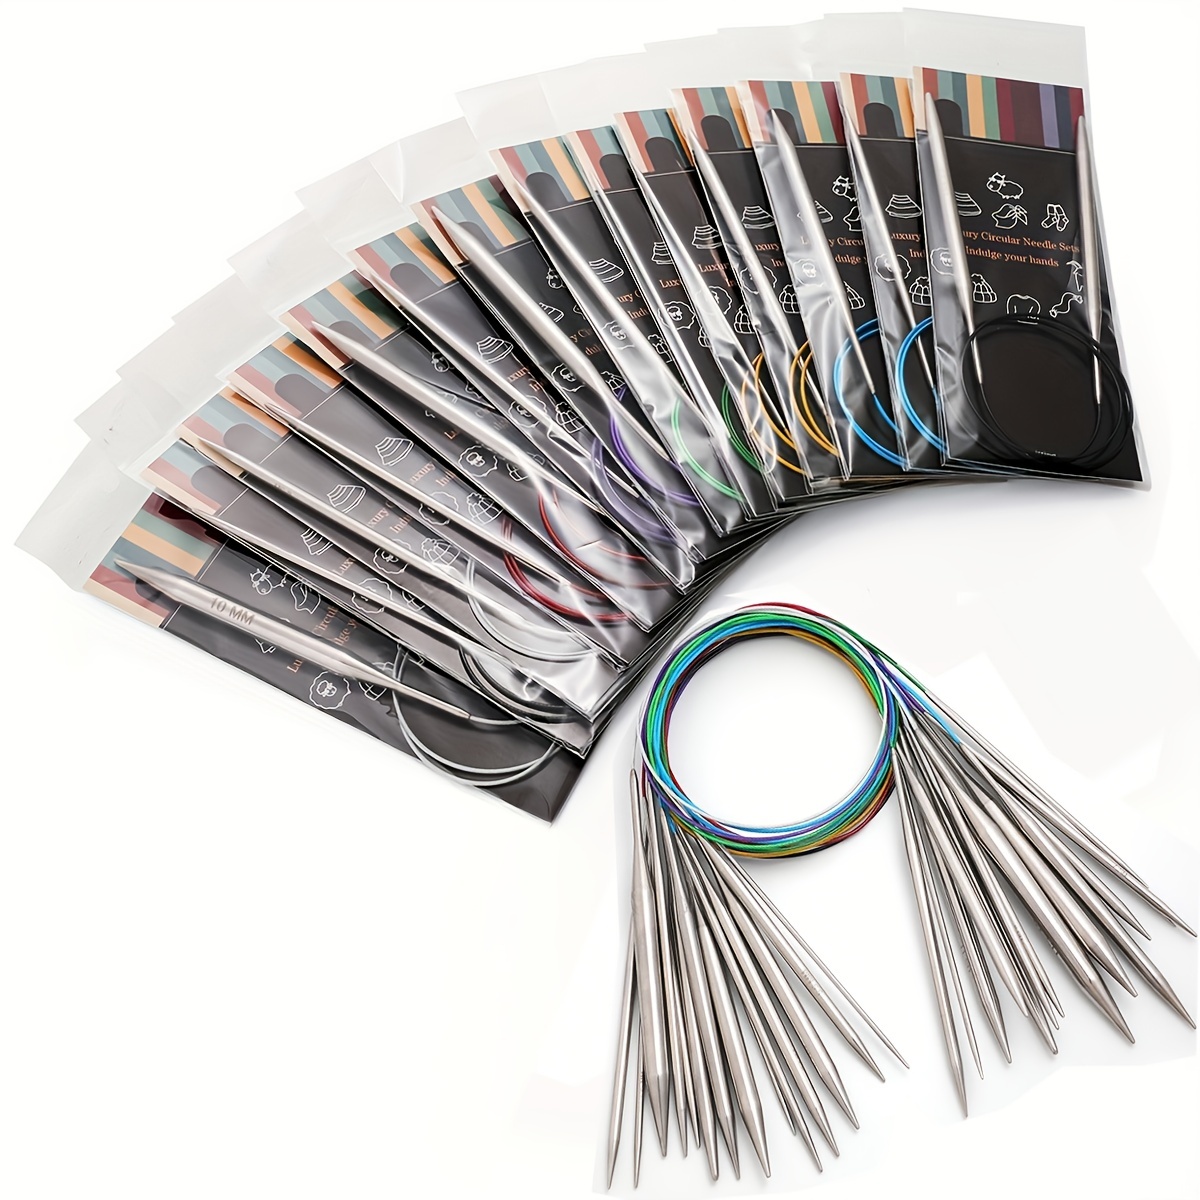 Wire crochet craft supply, Large single knitting needles by